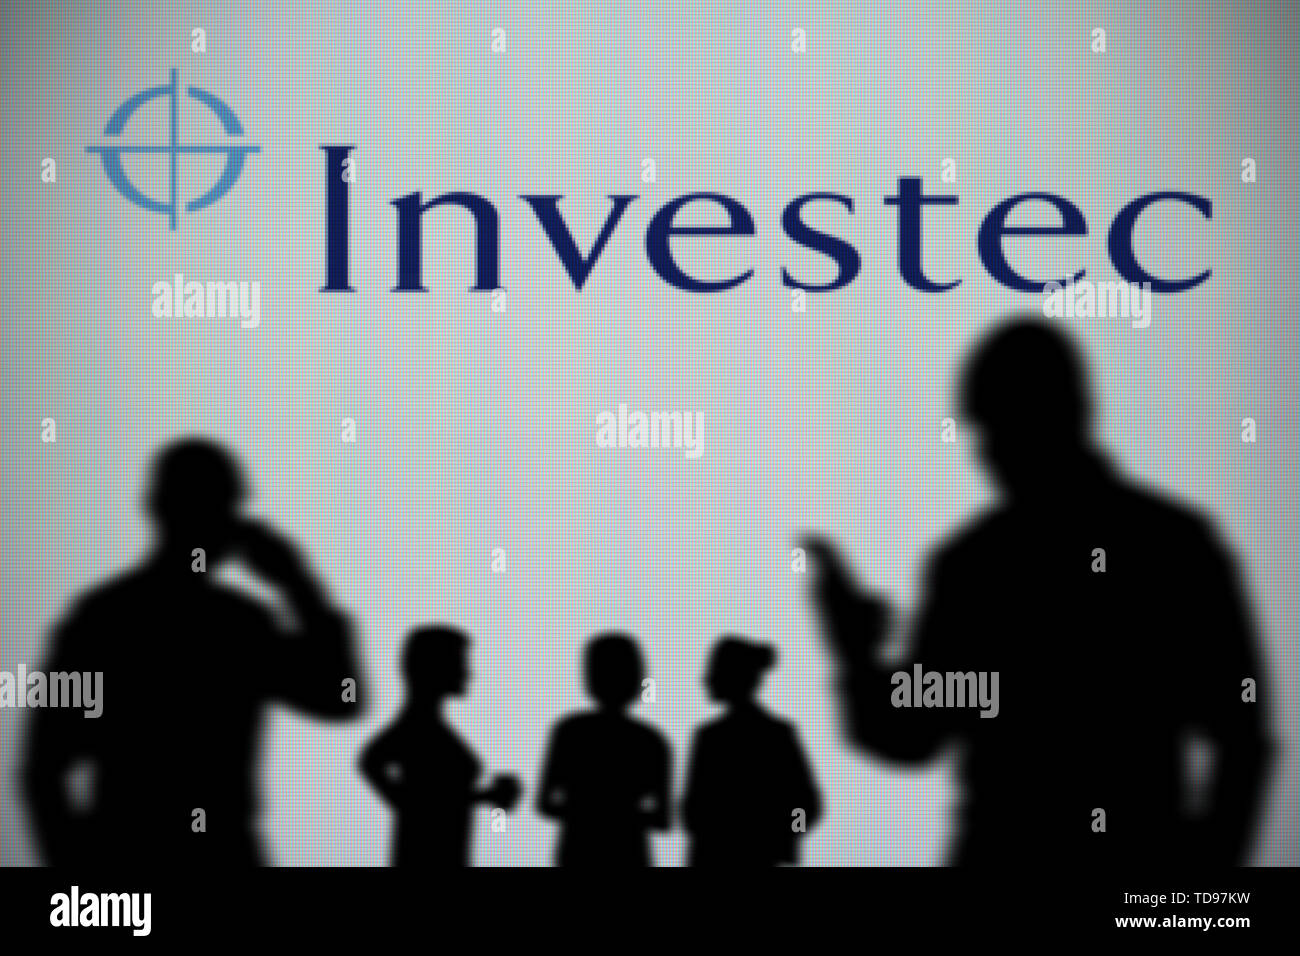 The Investec logo is seen on an LED screen in the background while a silhouetted person uses a smartphone in the foreground (Editorial use only) Stock Photo